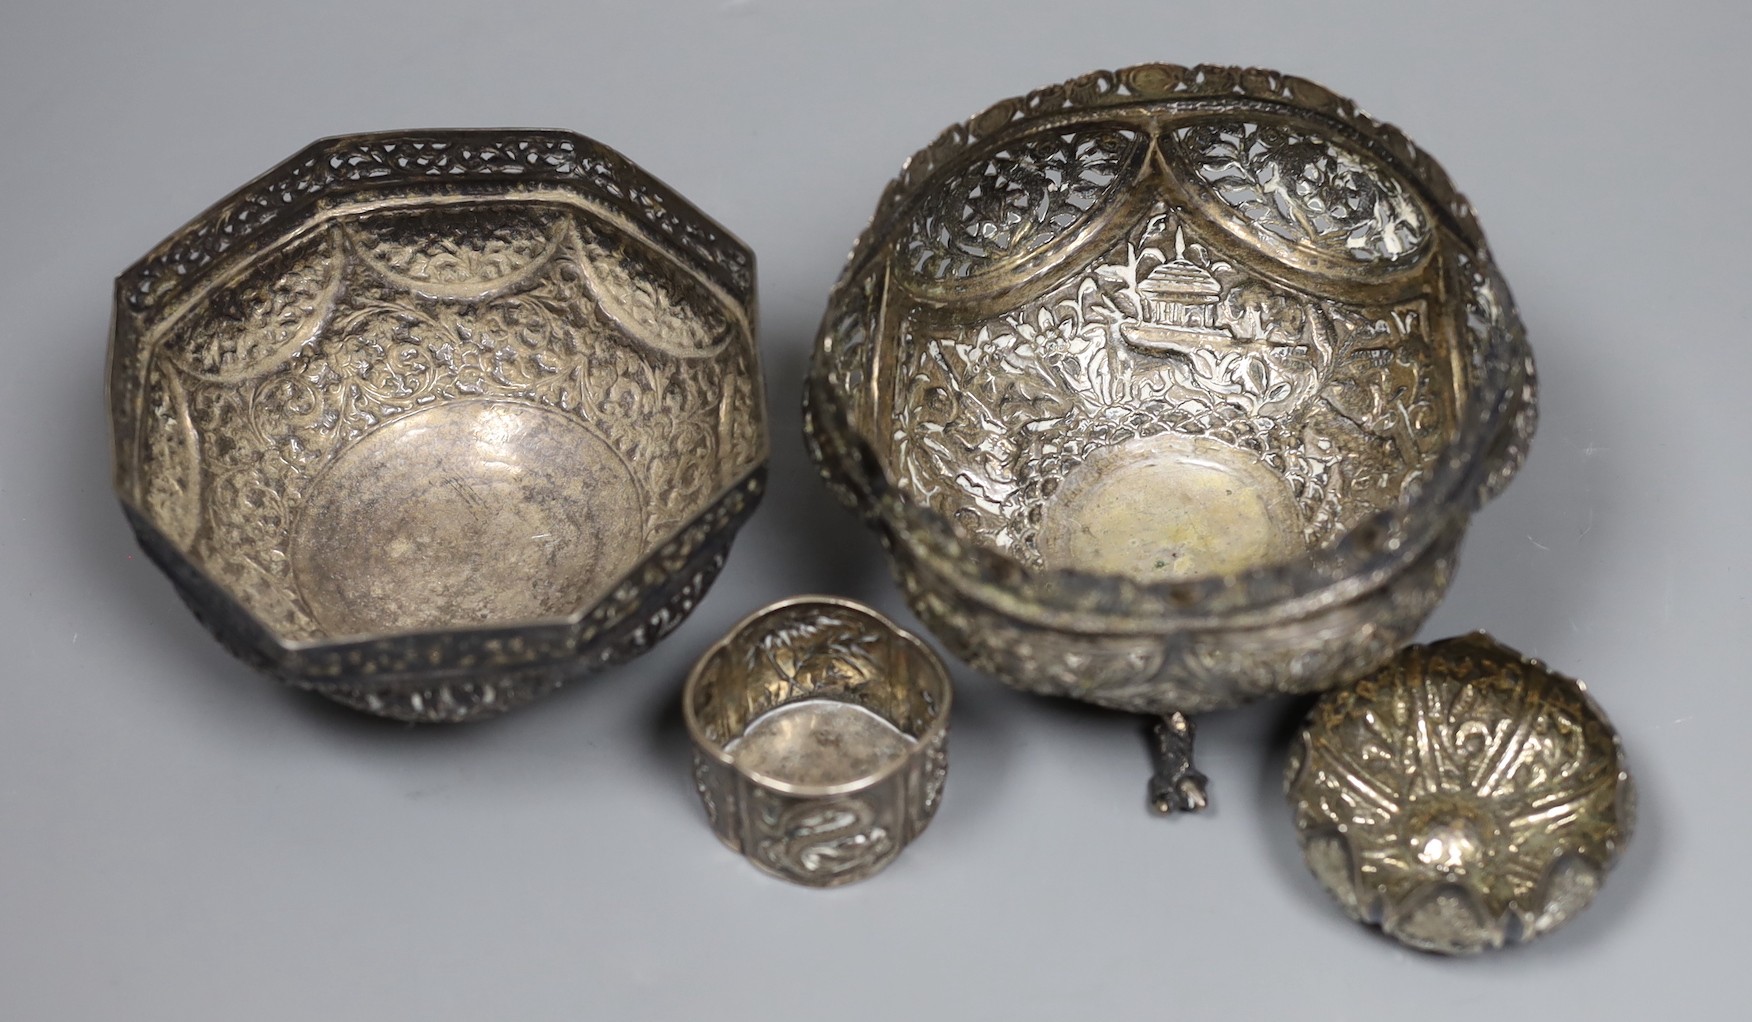 Two early 20th century Indian repousse white metal bowls, widest 12cm, a similar small dish and a salt.